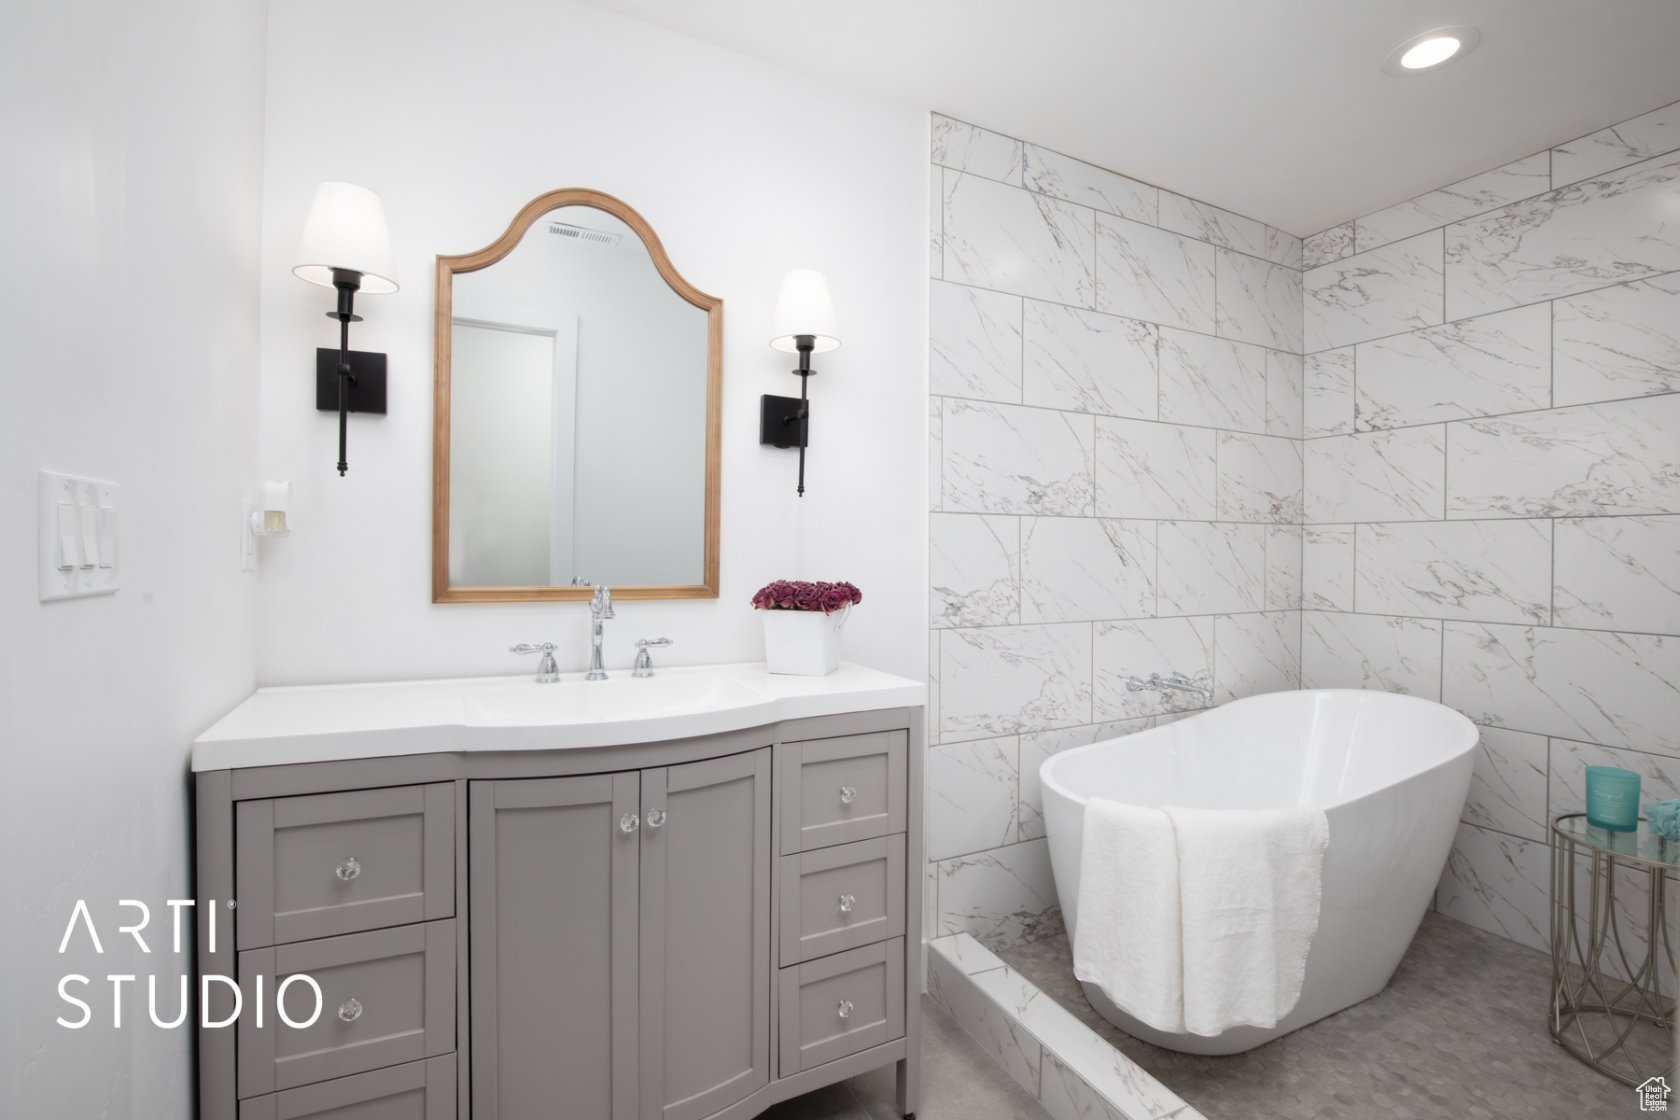 Bathroom featuring oversized vanity, tile walls, and a soaking tub in a large wetroom